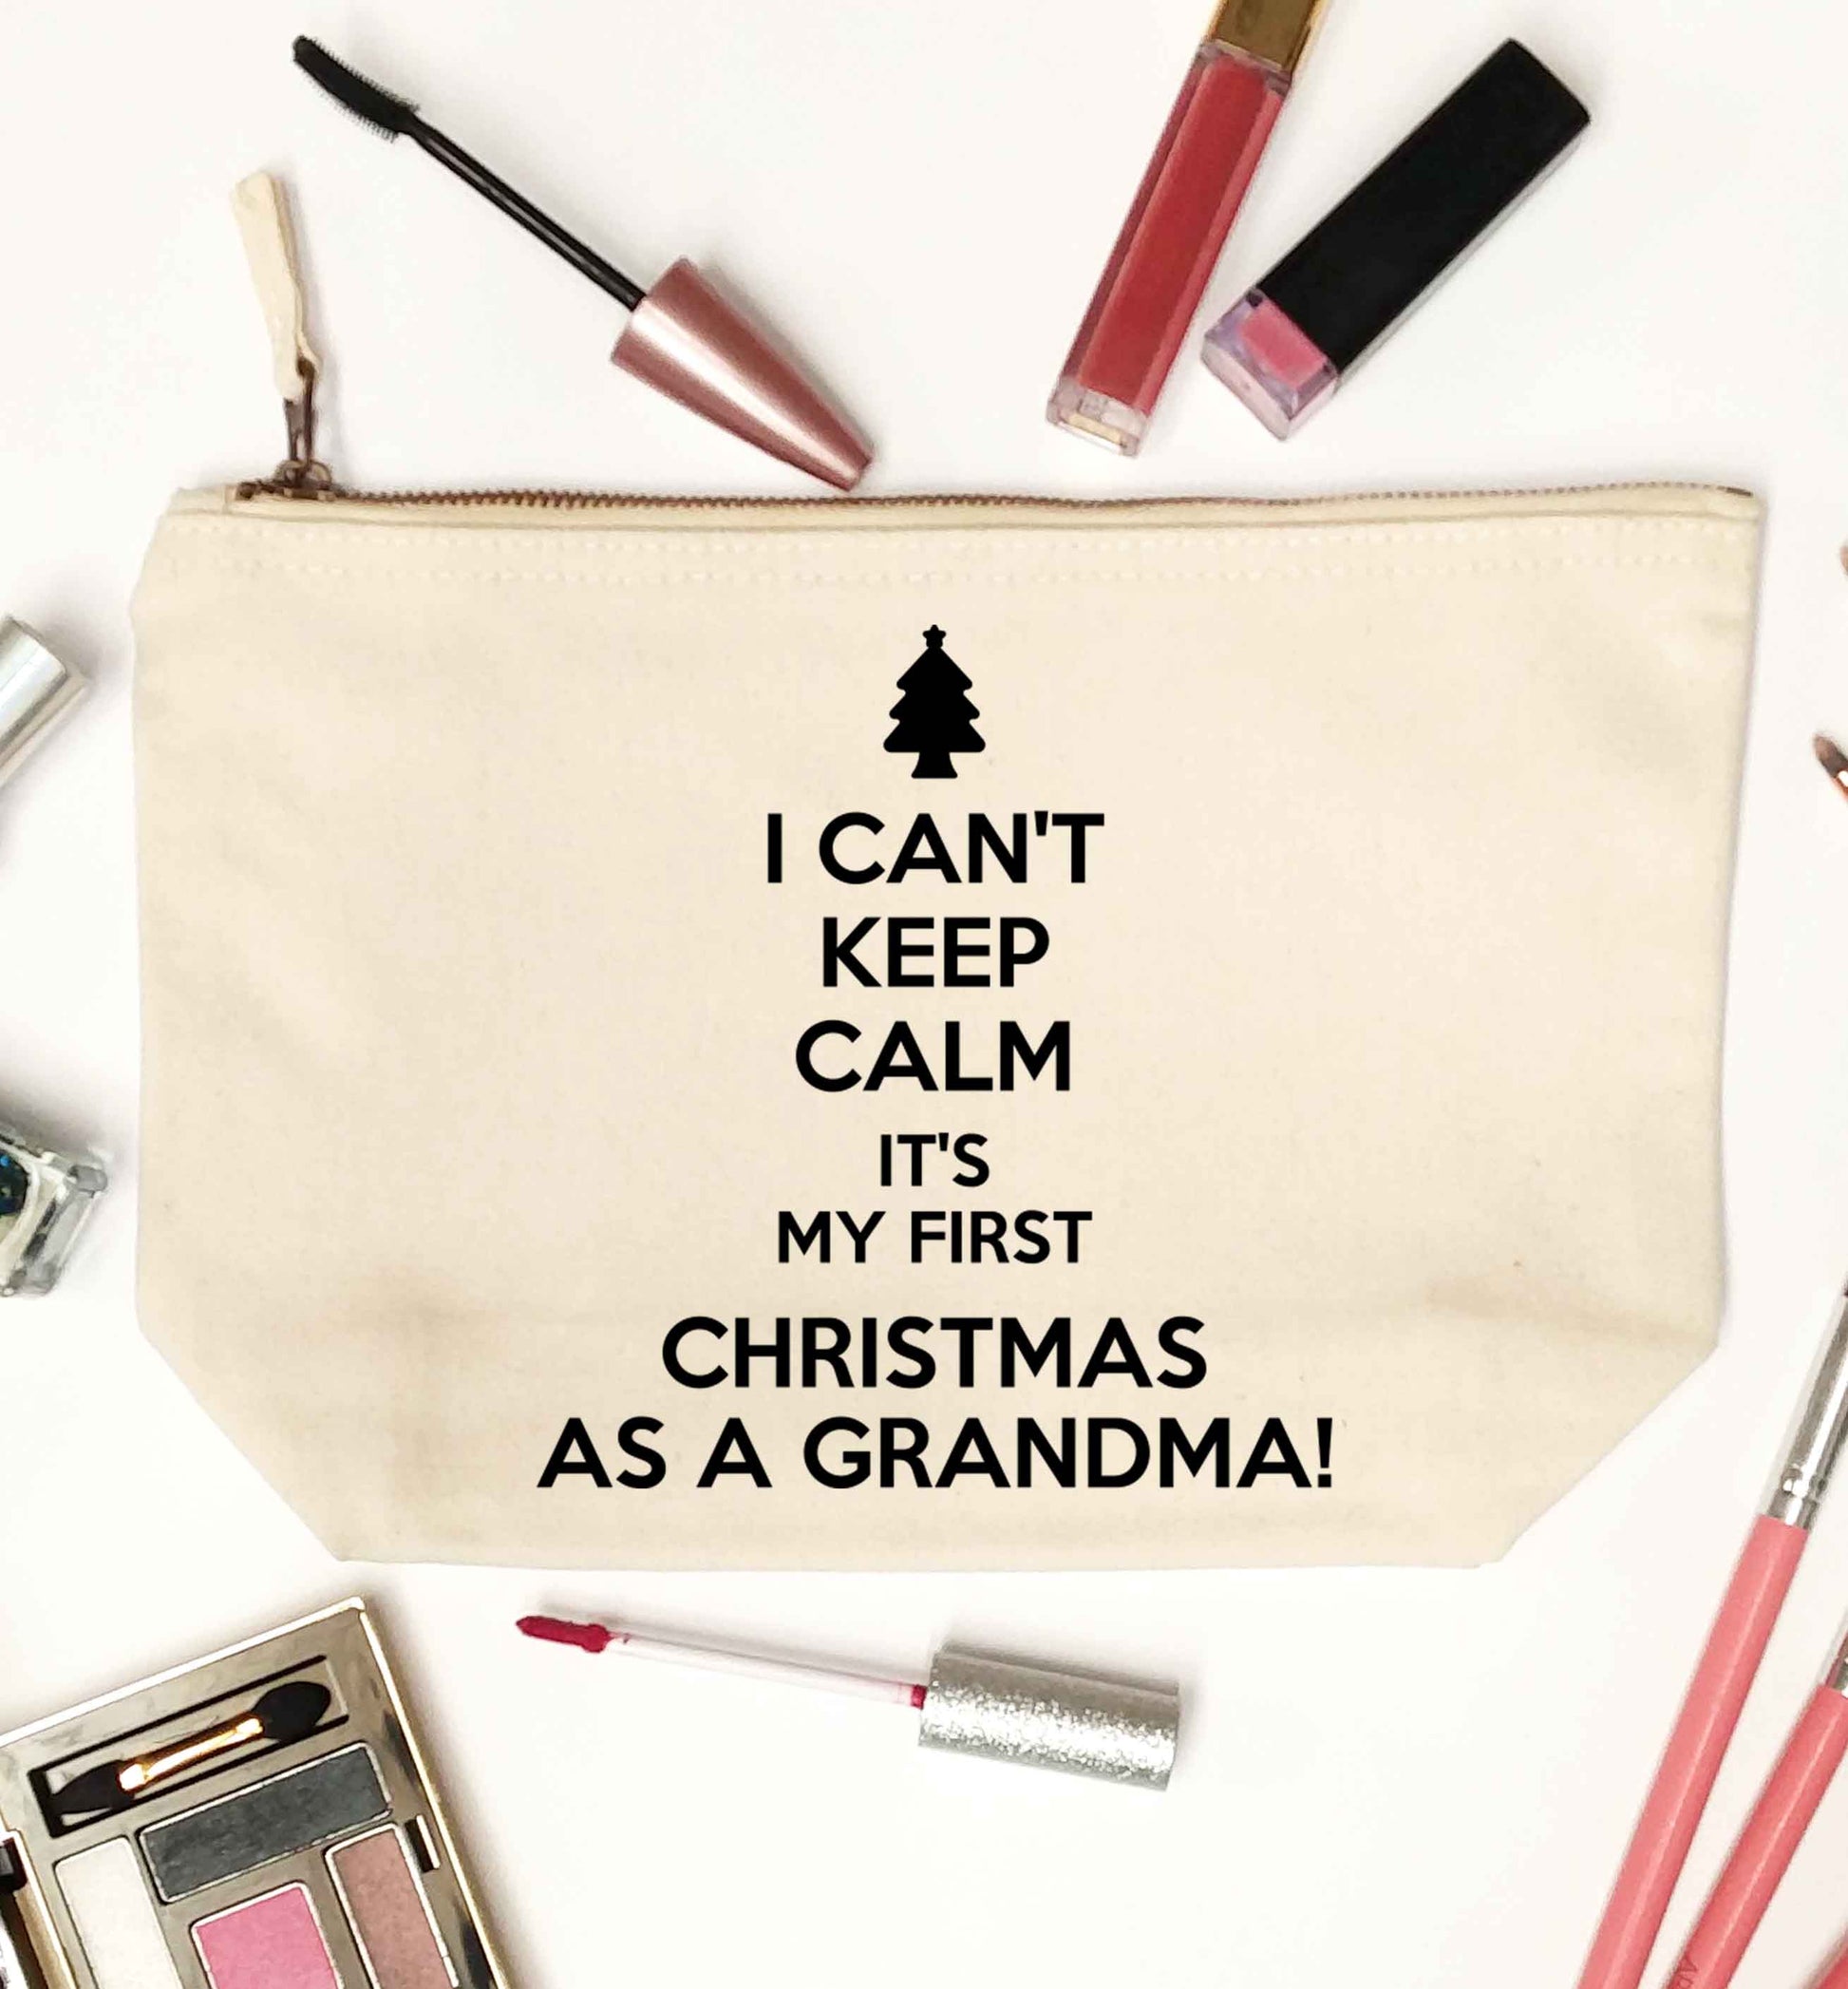 I can't keep calm it's my first Christmas as a grandma! natural makeup bag